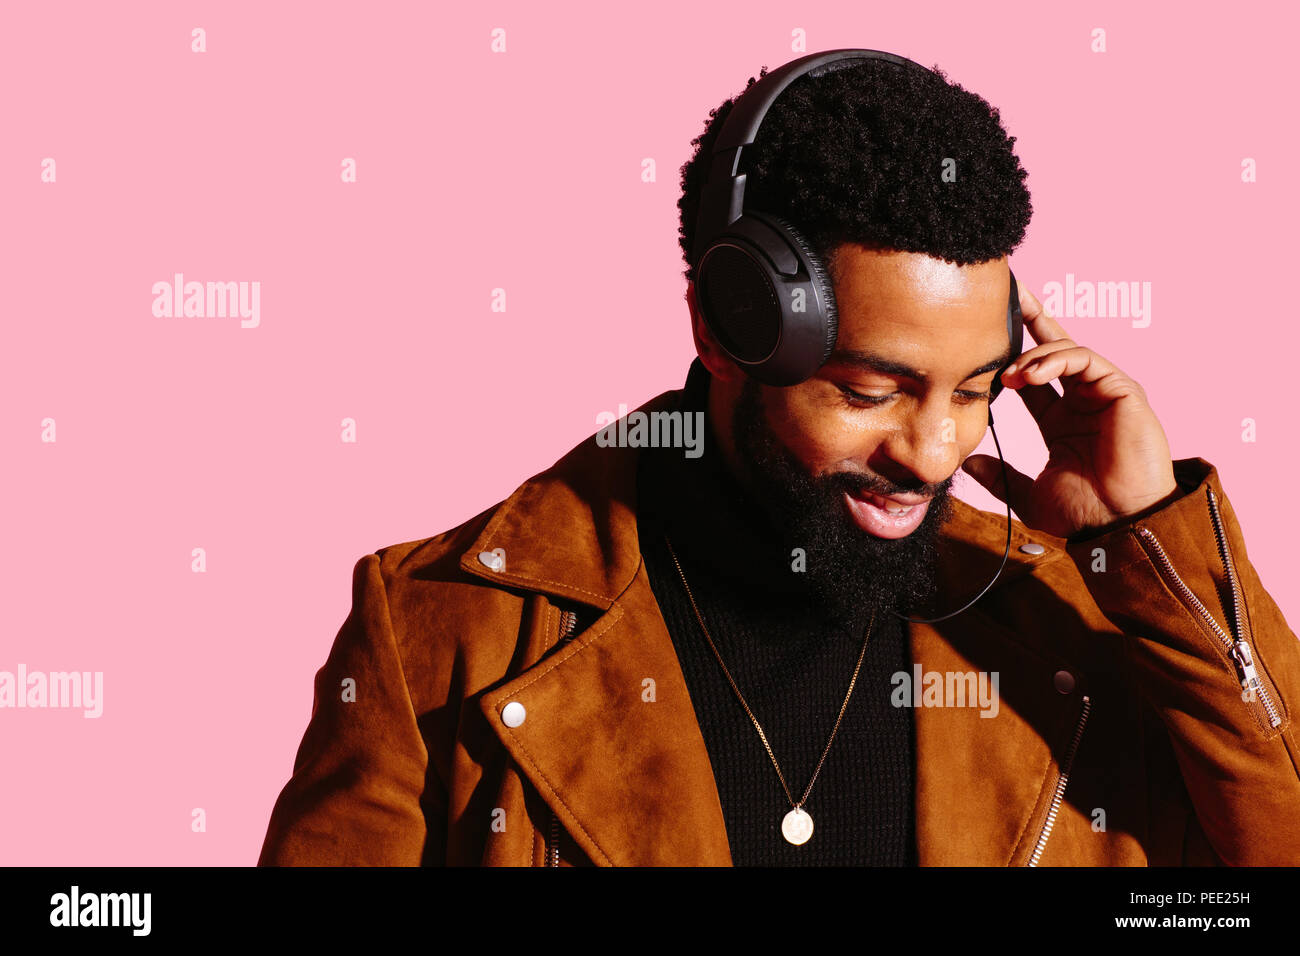 Portrait of a smiling man with beard and headphones, looking down listening to music, isolated on pink studio background Stock Photo